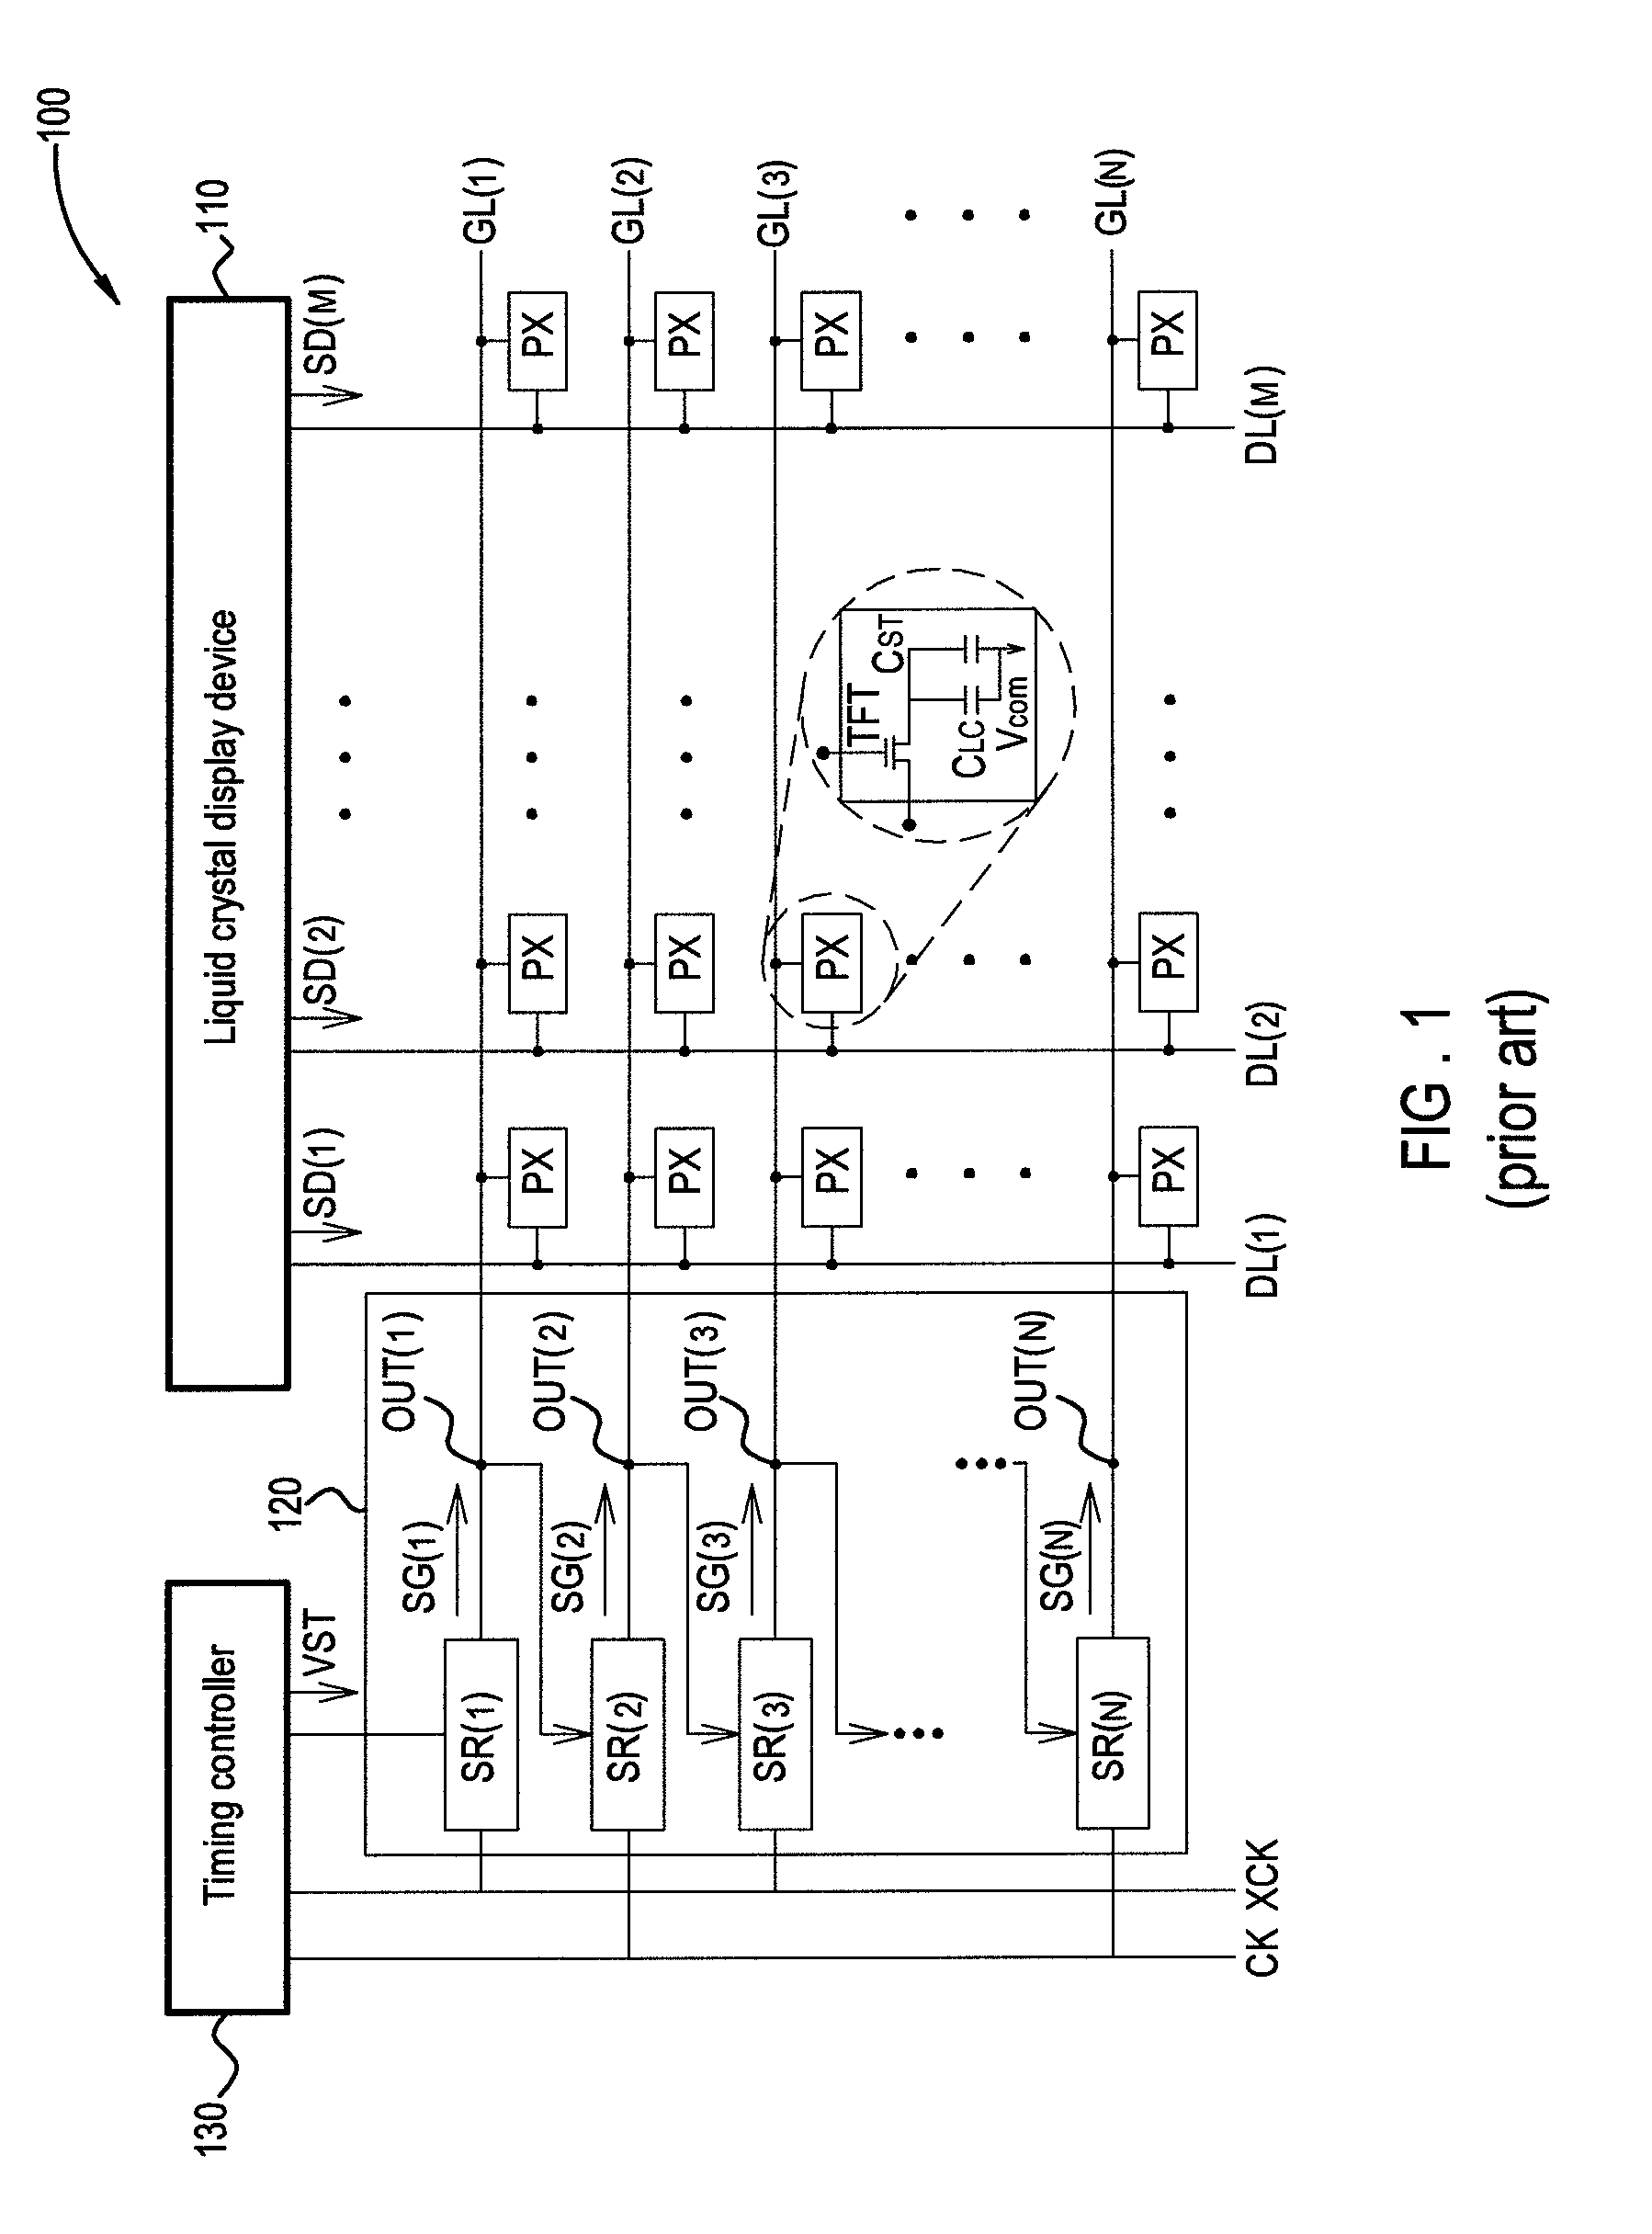 Liquid crystal display panel and gate driver circuit of a liquid crystal display panel including shift registers